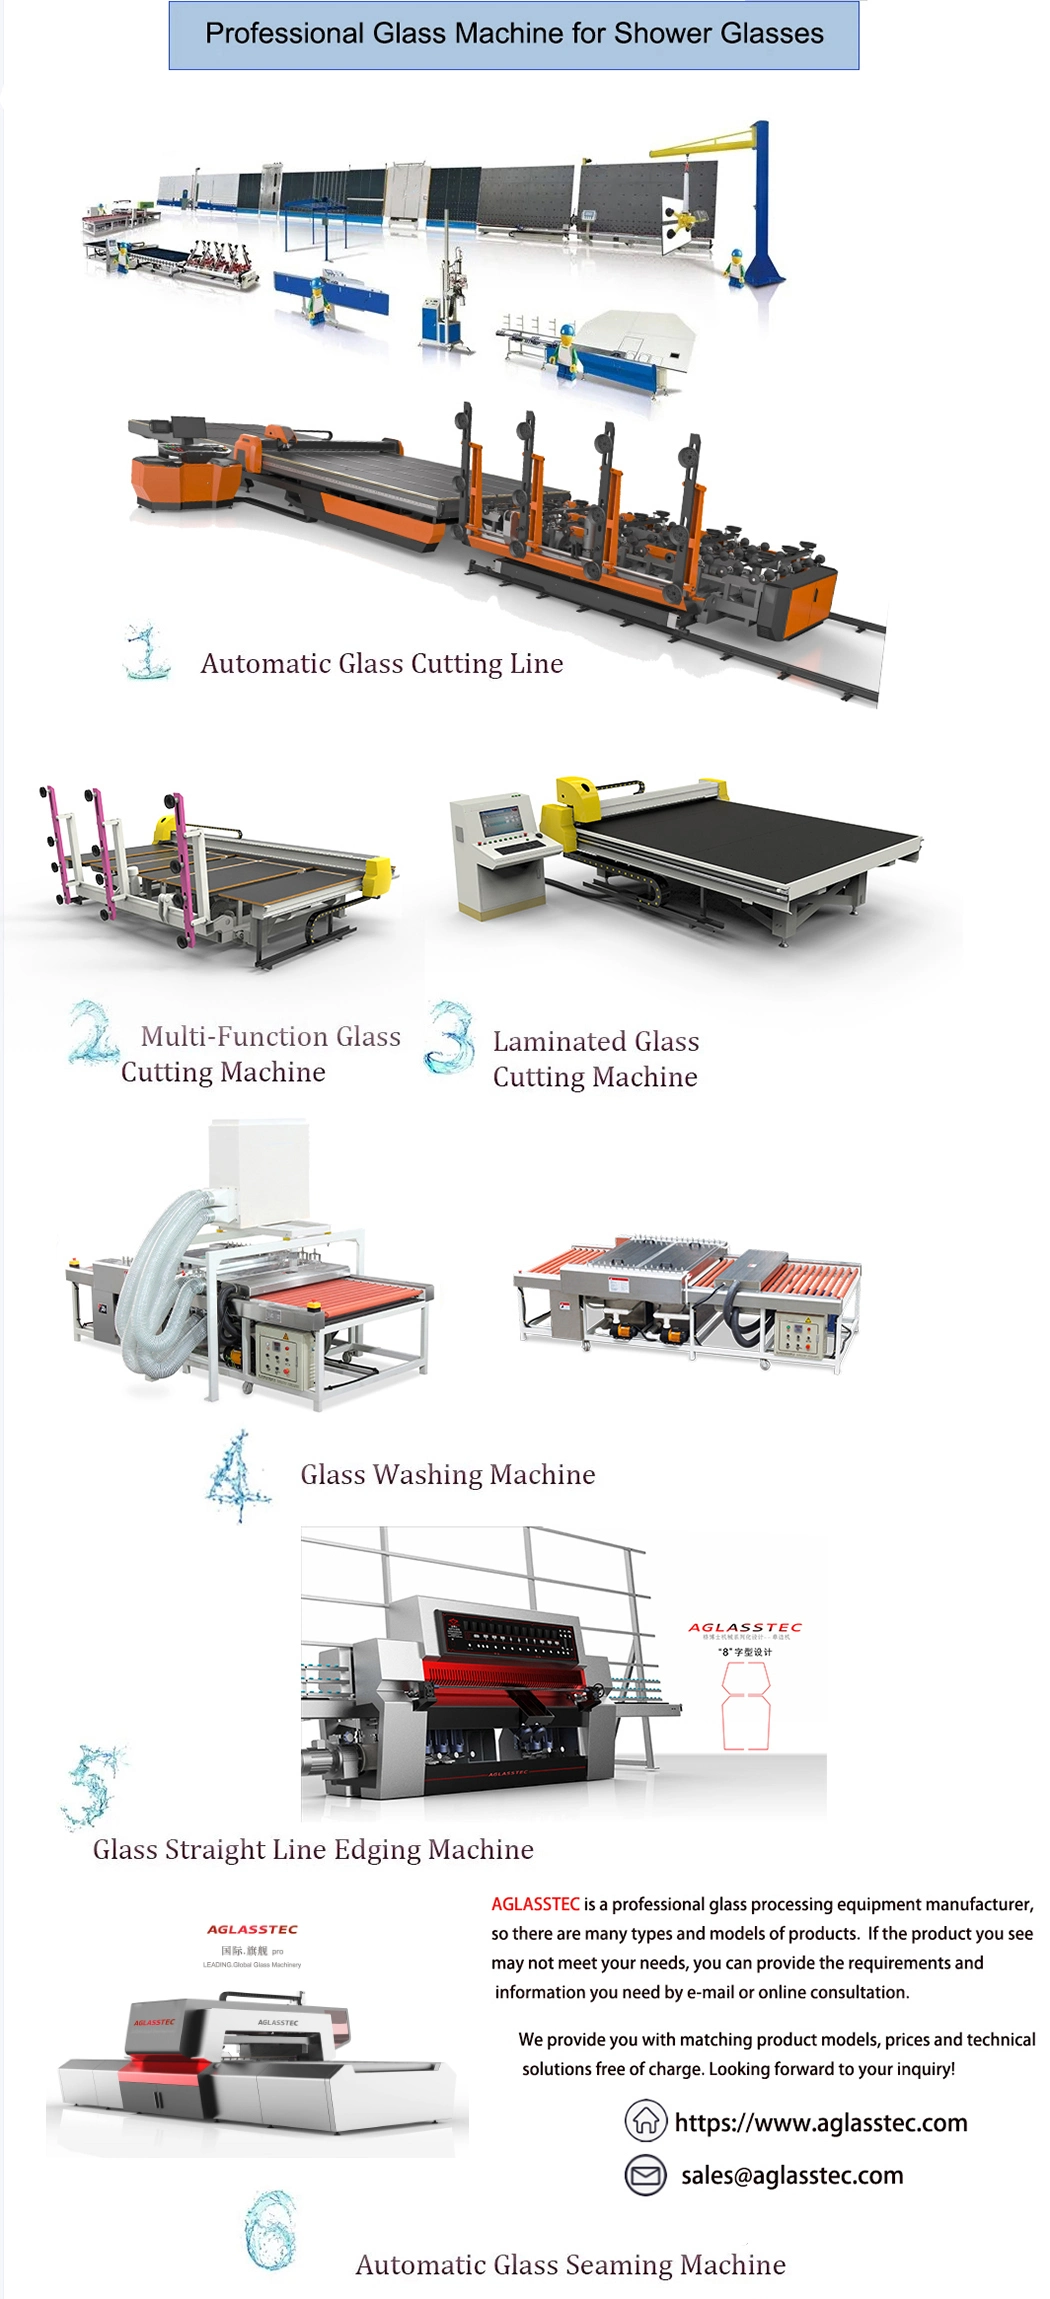 China Factory Aglasstec Automatic Glass Seaming Machine with Loading and Unloading Table Width for 2000mm Glass